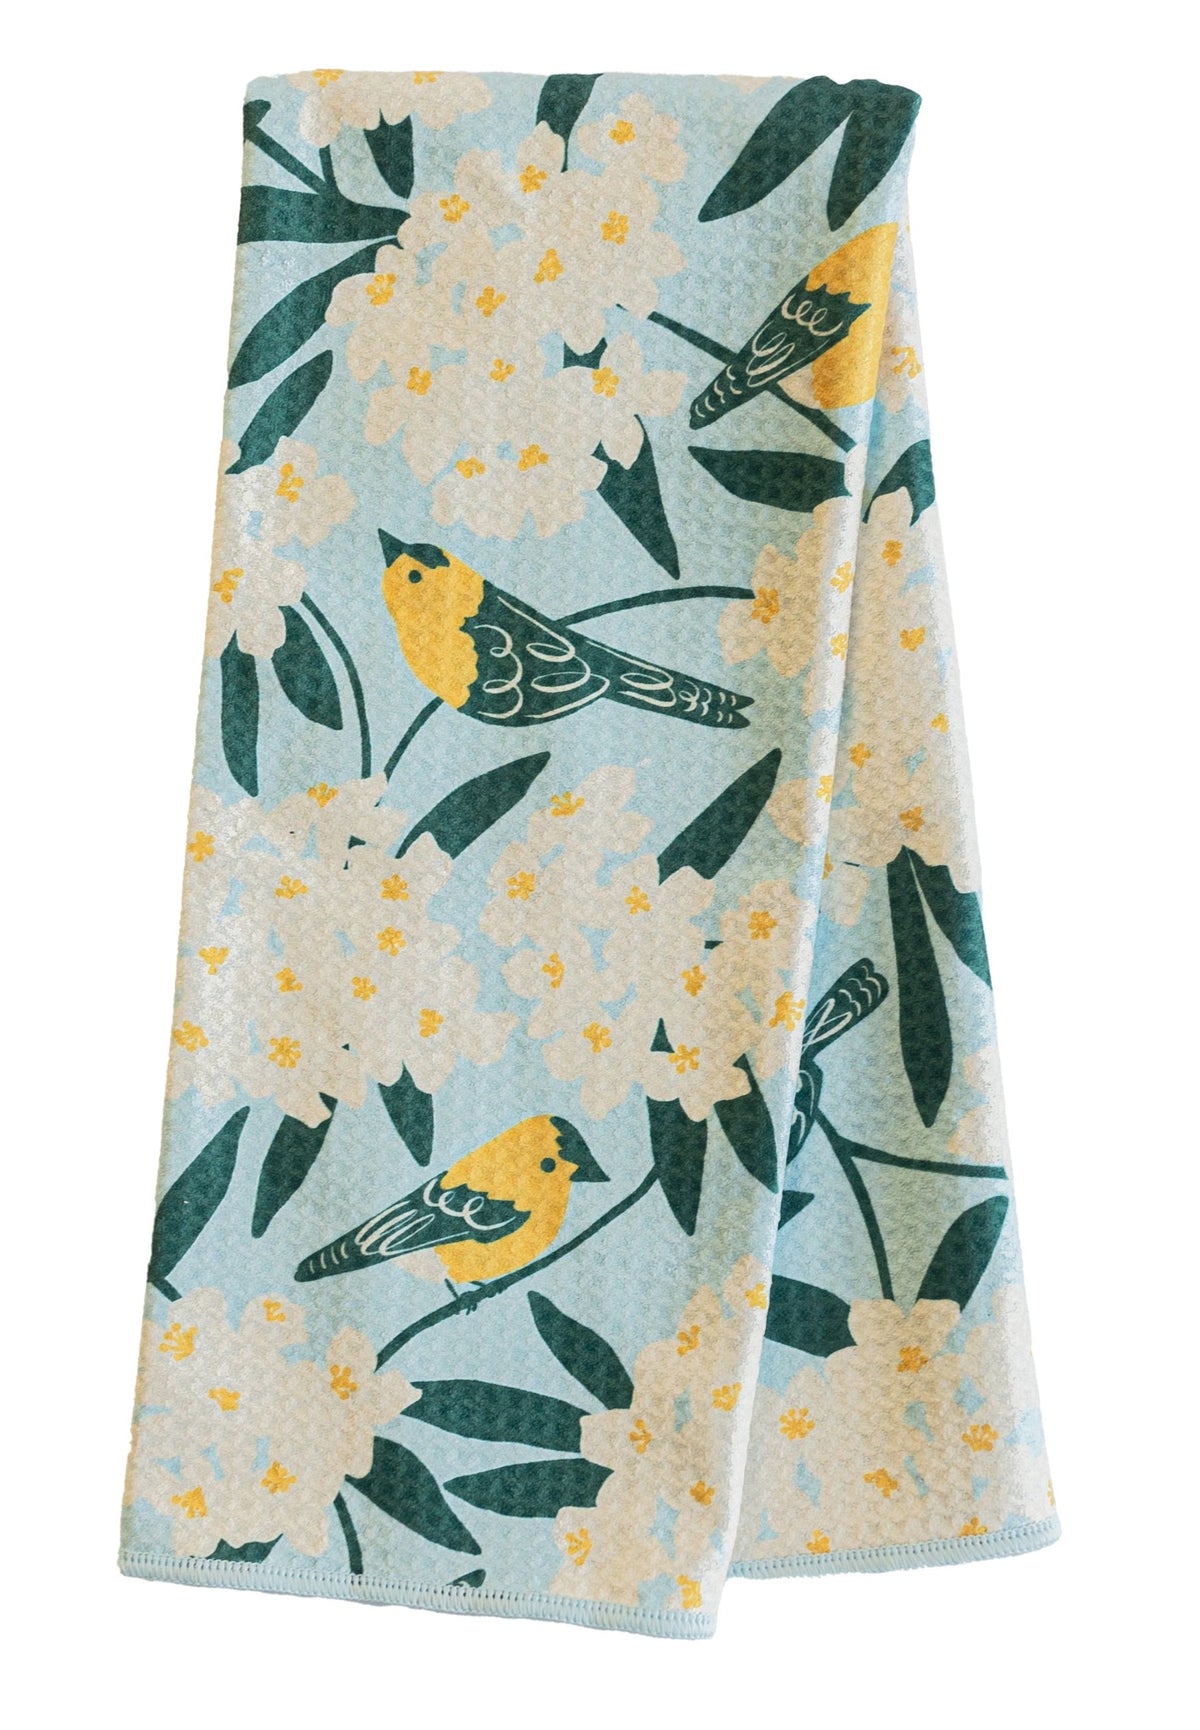 Anywhere Towel - Nuthatch Birdsong Kitchen Towels Once Again Home Co.   